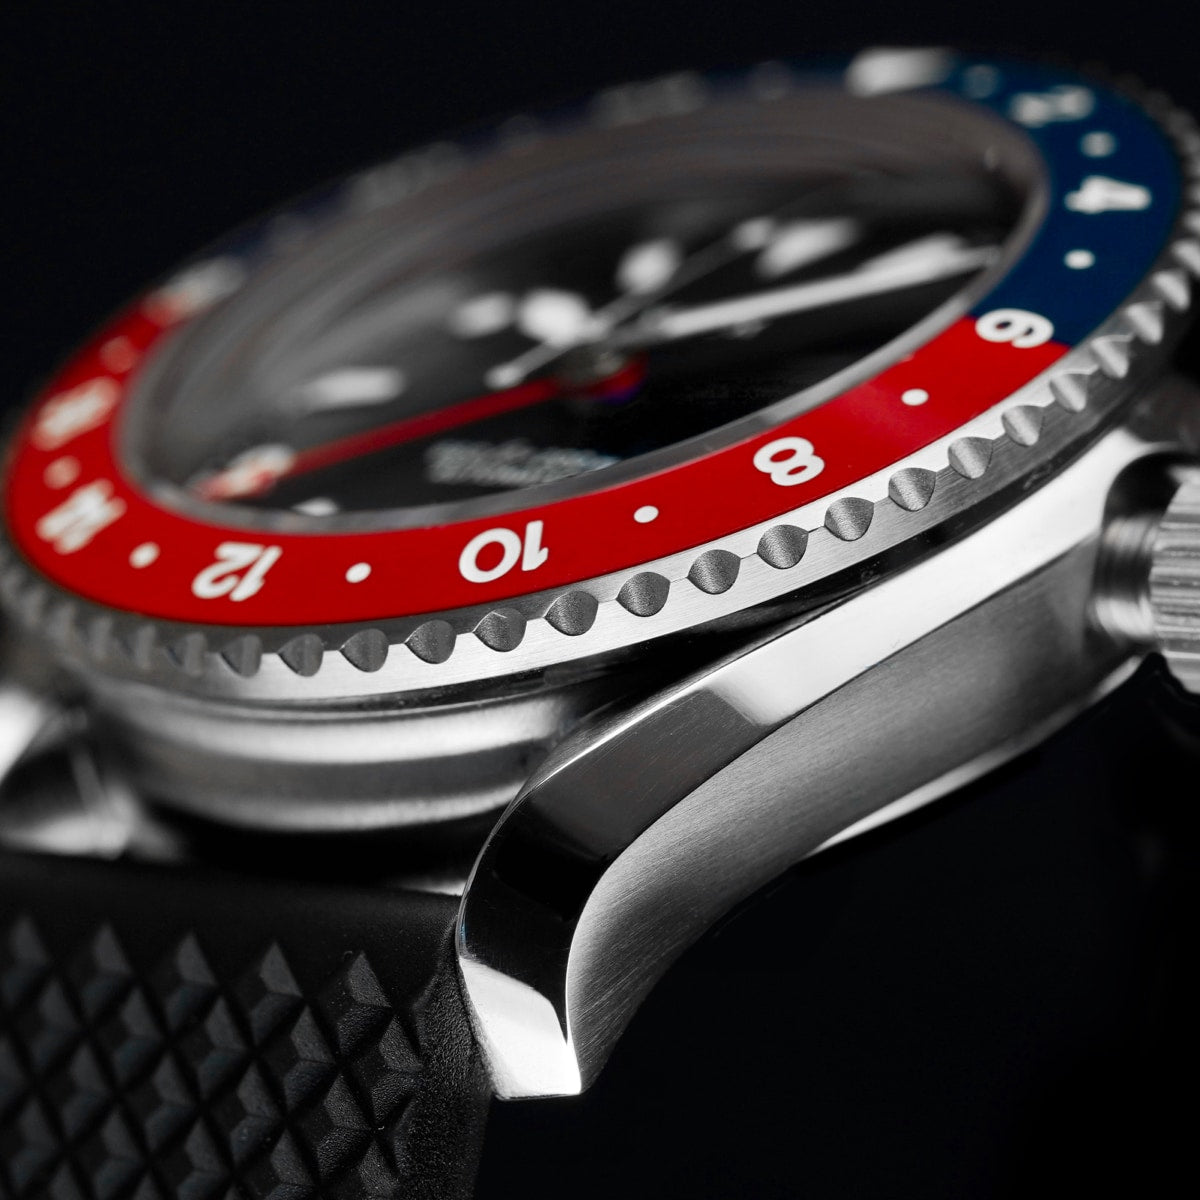 G5 Meridian Navy/Red - 39mm USA GMT